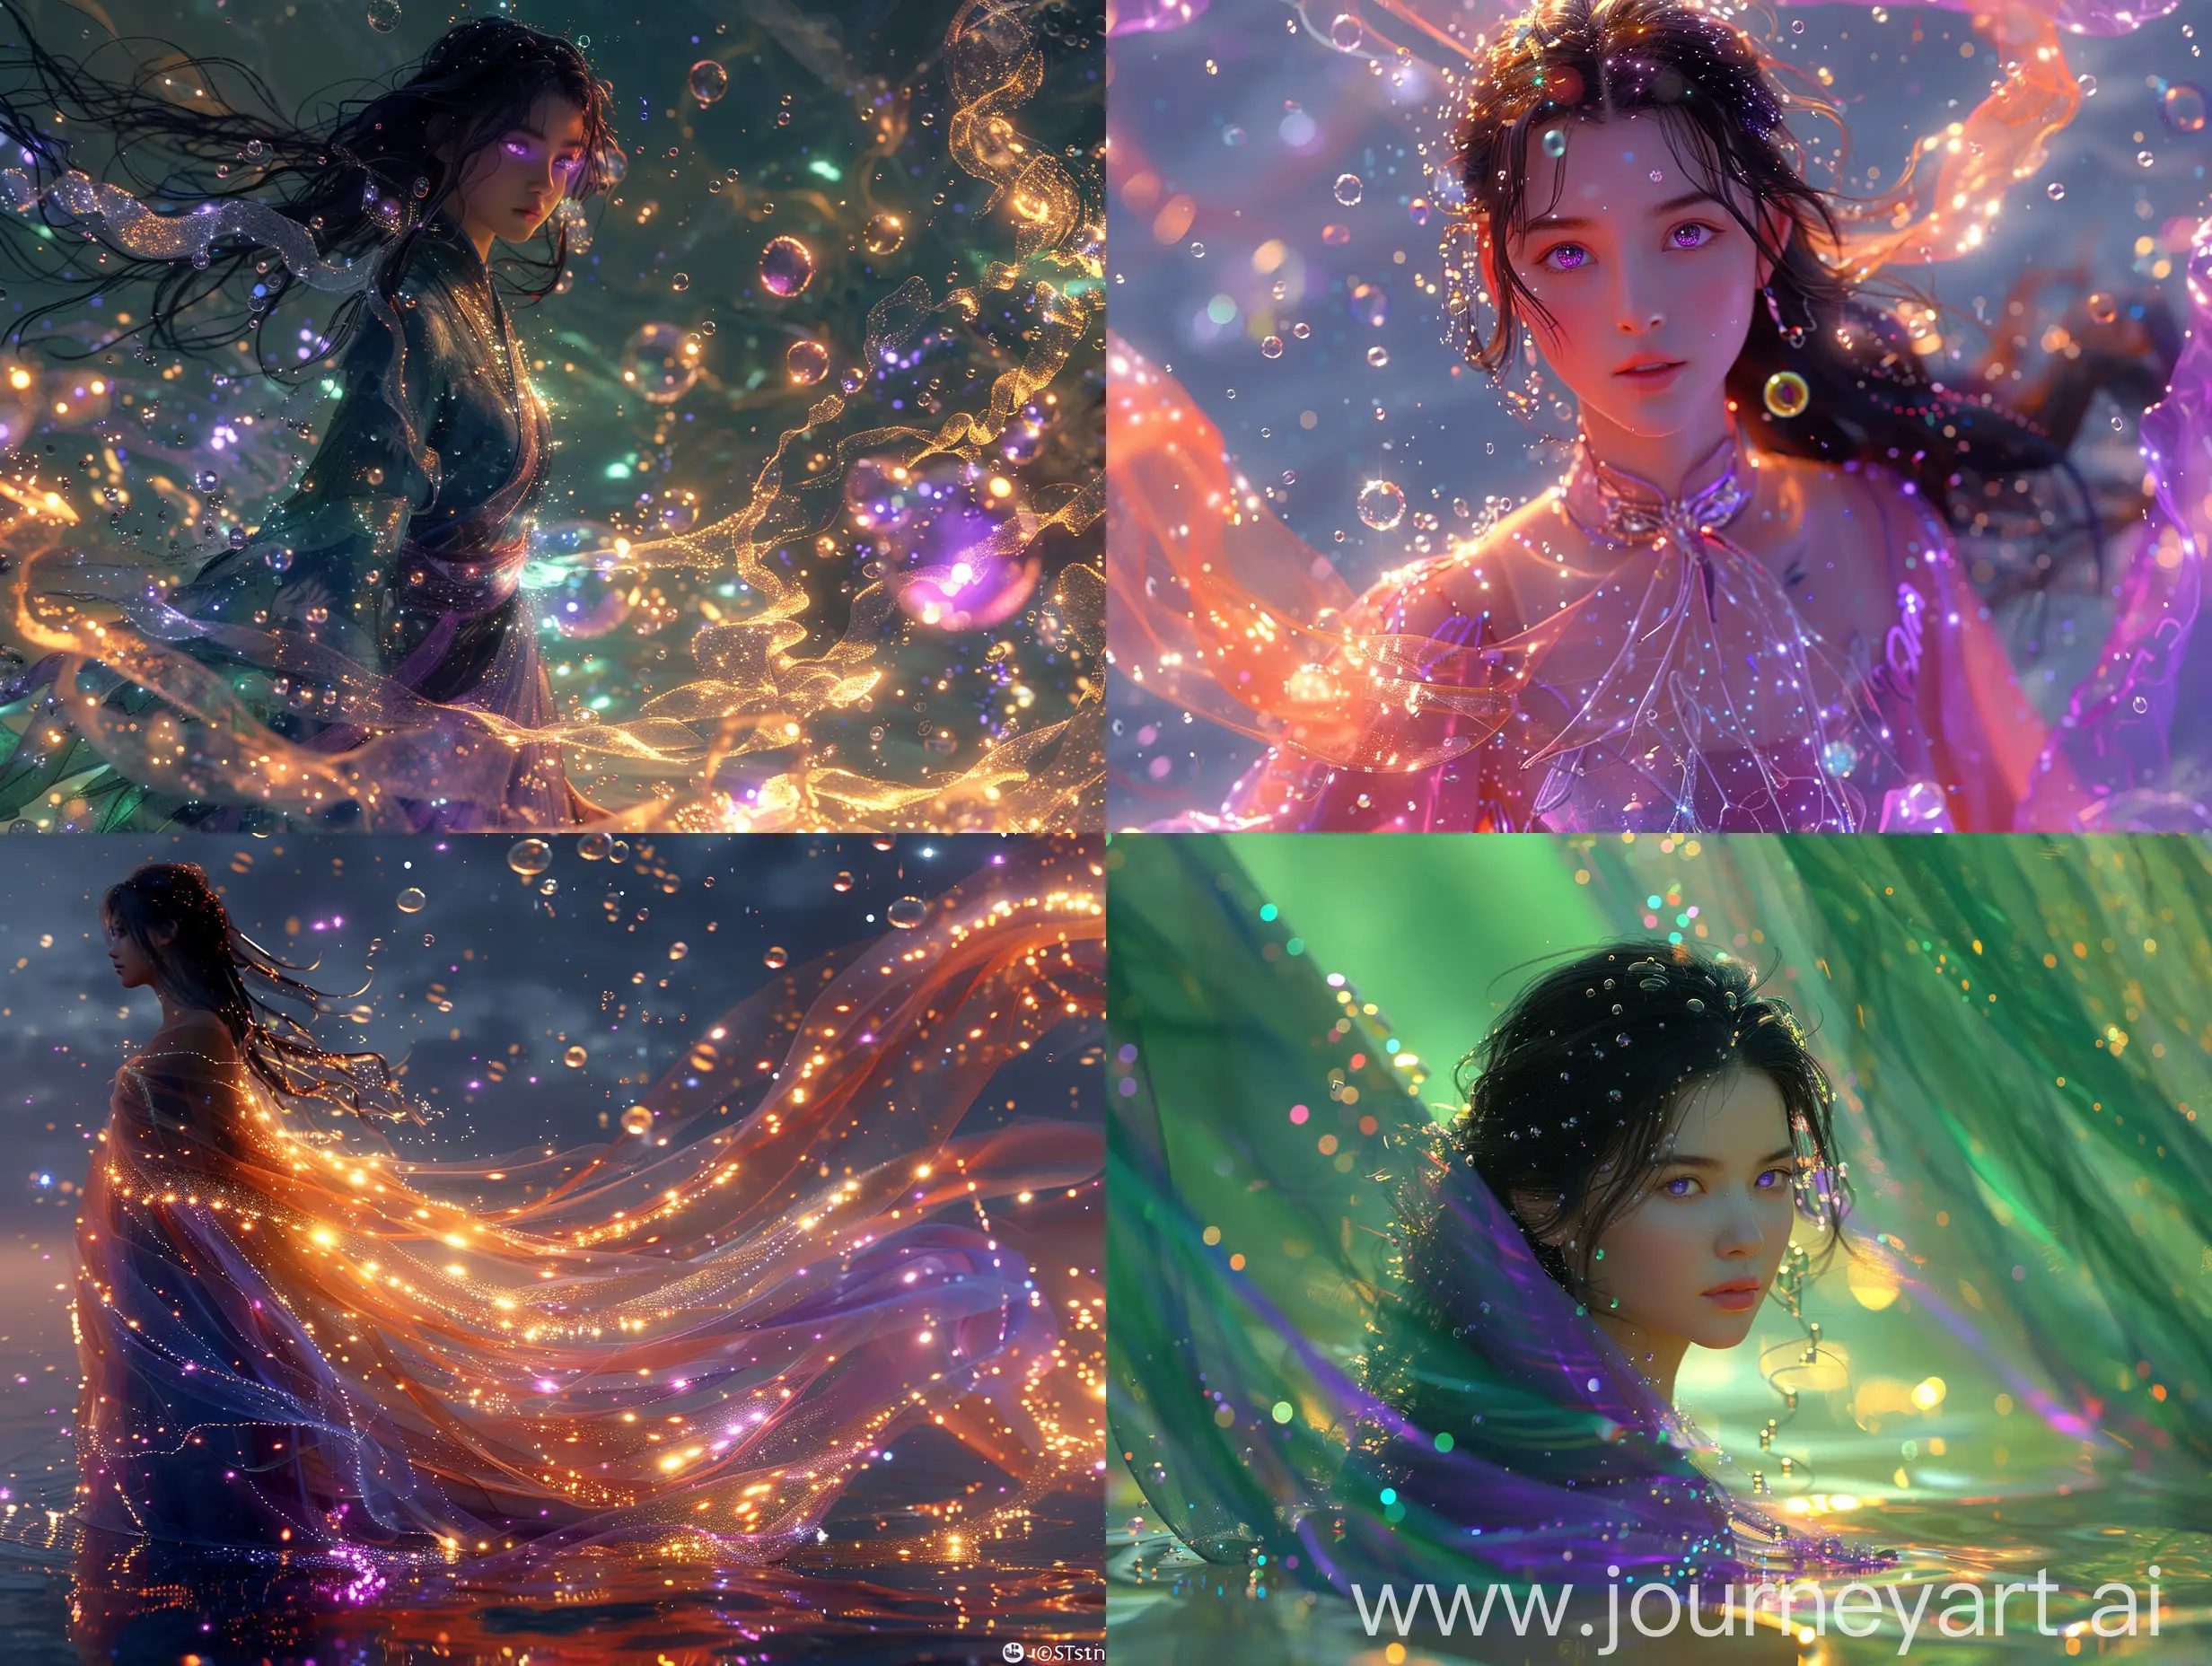 Ethereal-Fantasy-Portrait-Glowing-Bubble-Threads-and-Magical-Drapery